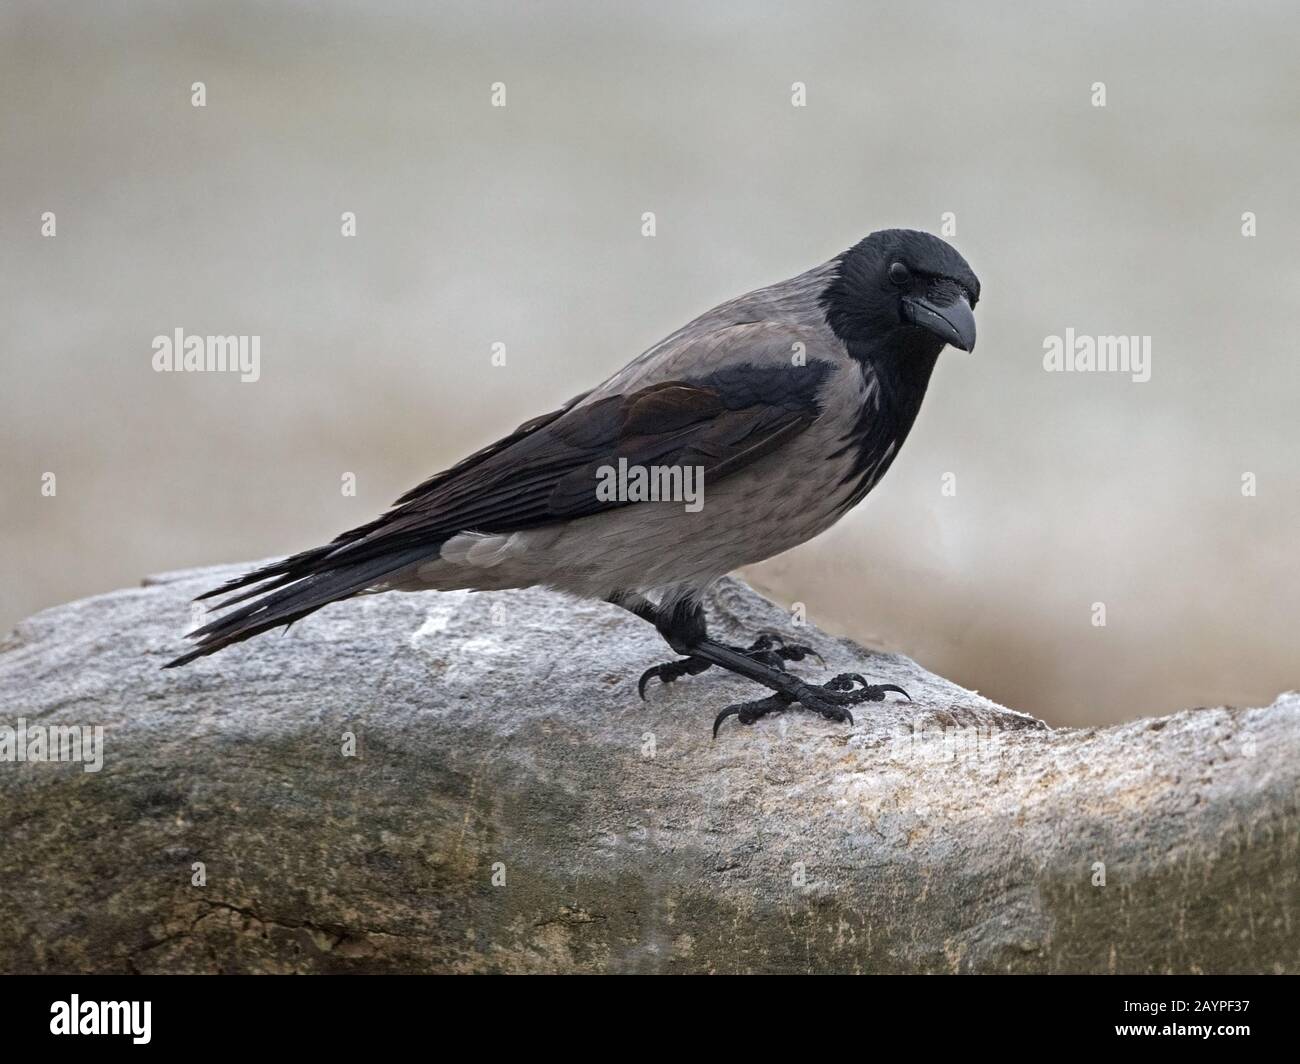 Hooded crow perched Stock Photo